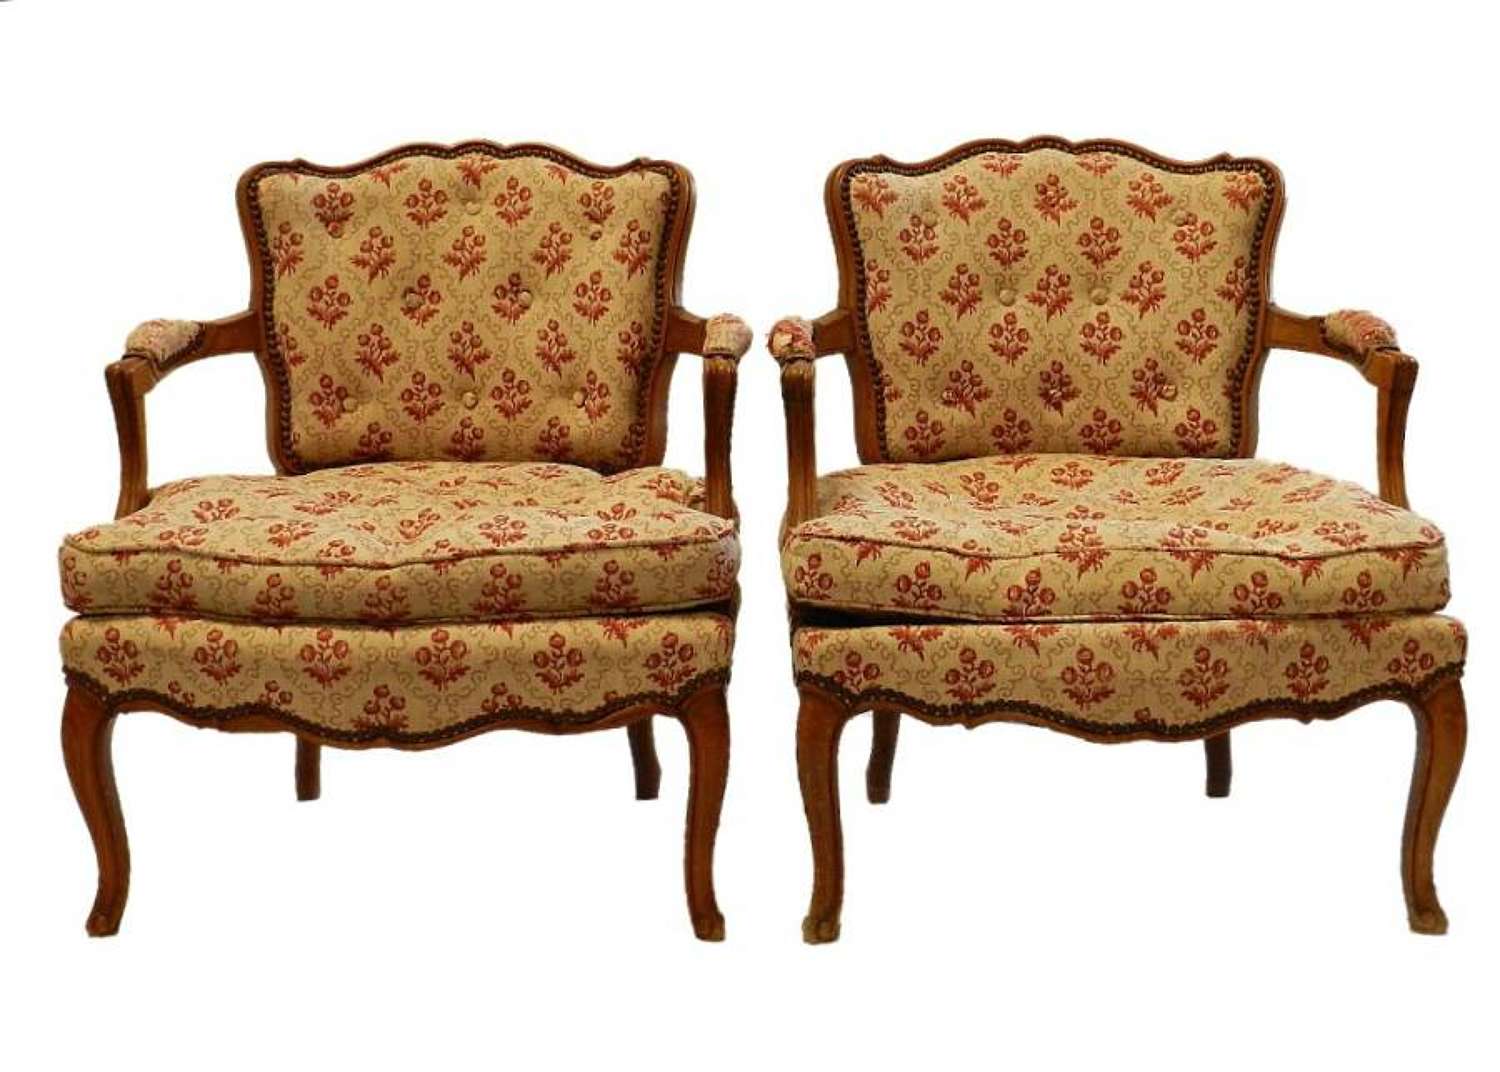 Pair of Diminutive French Open Armchairs